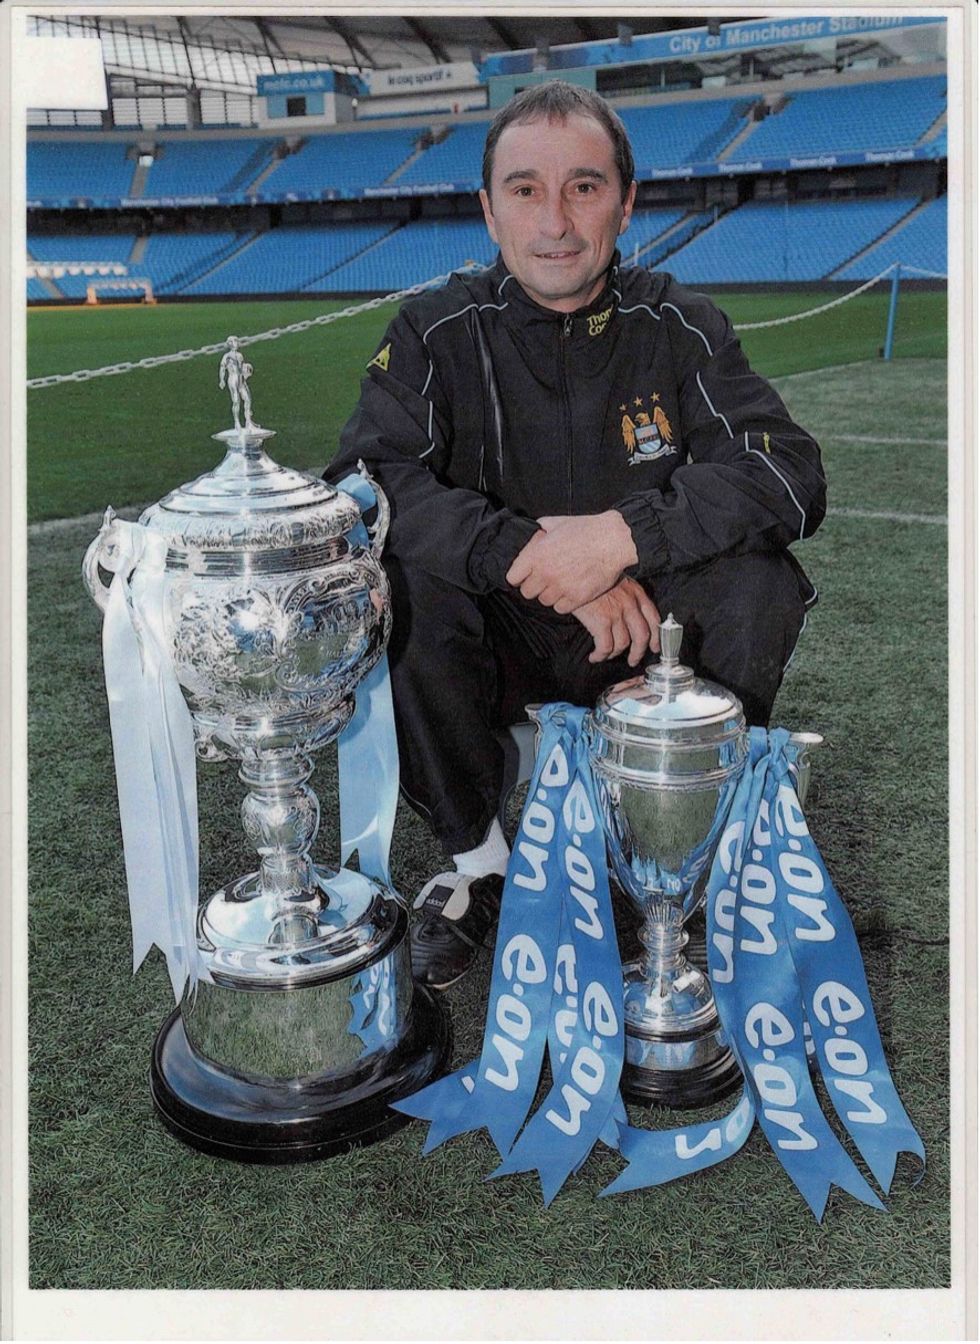 Former Manchester City academy coach and head of education and performance management Pete Lowe